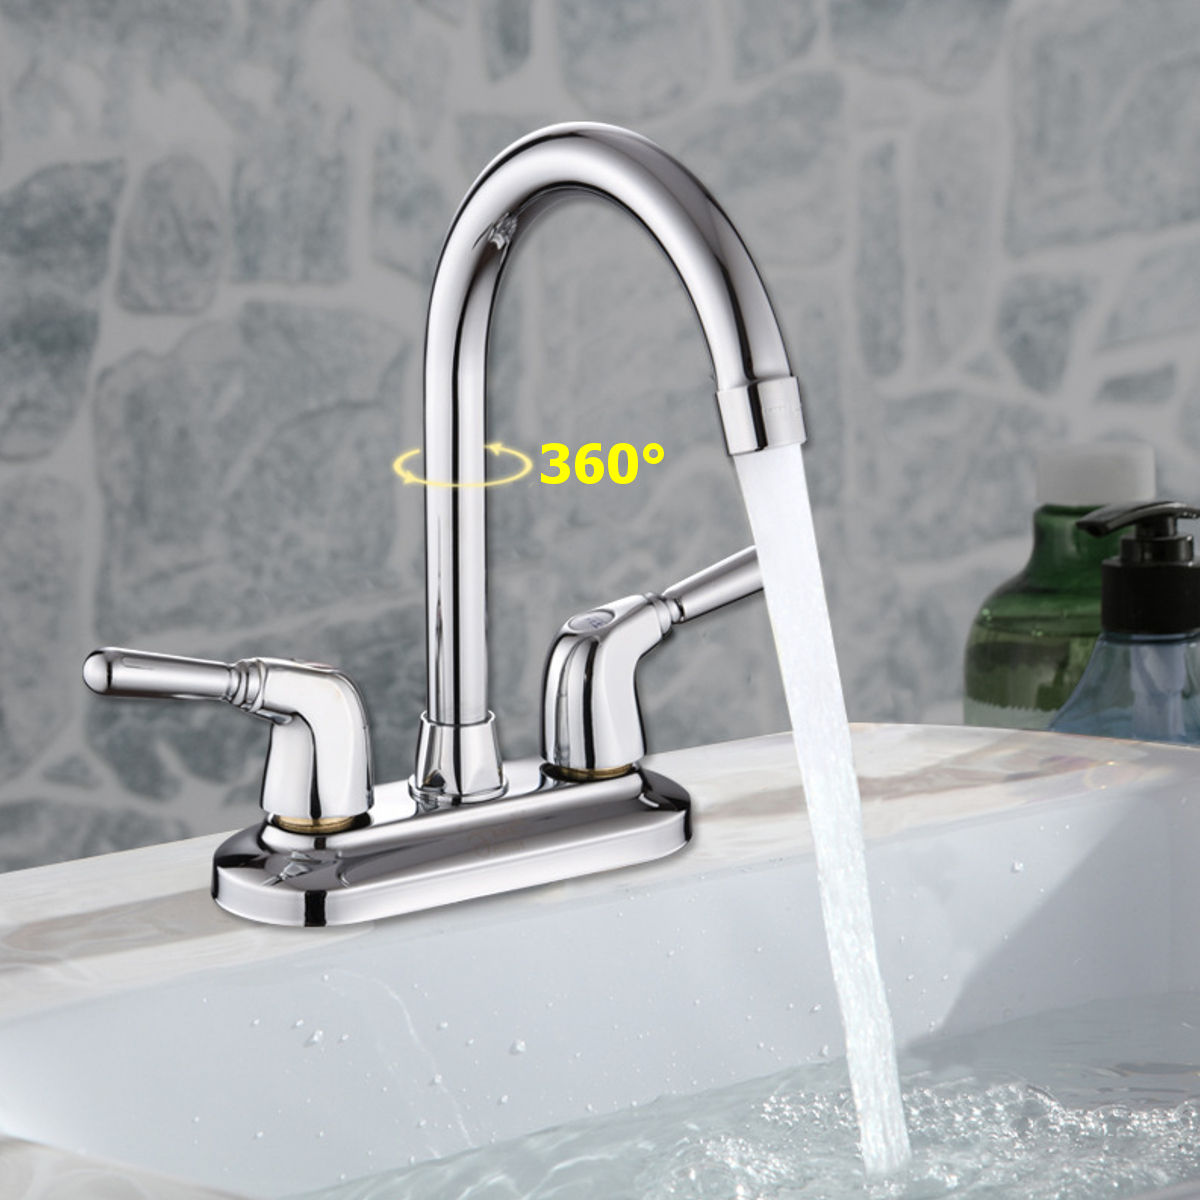 Novashion 360° Rotates Mixer Tap for Kitchen Faucet Double Holes and Handles Sink Faucet Basin Sink Mixer Water Tap - image 1 of 6